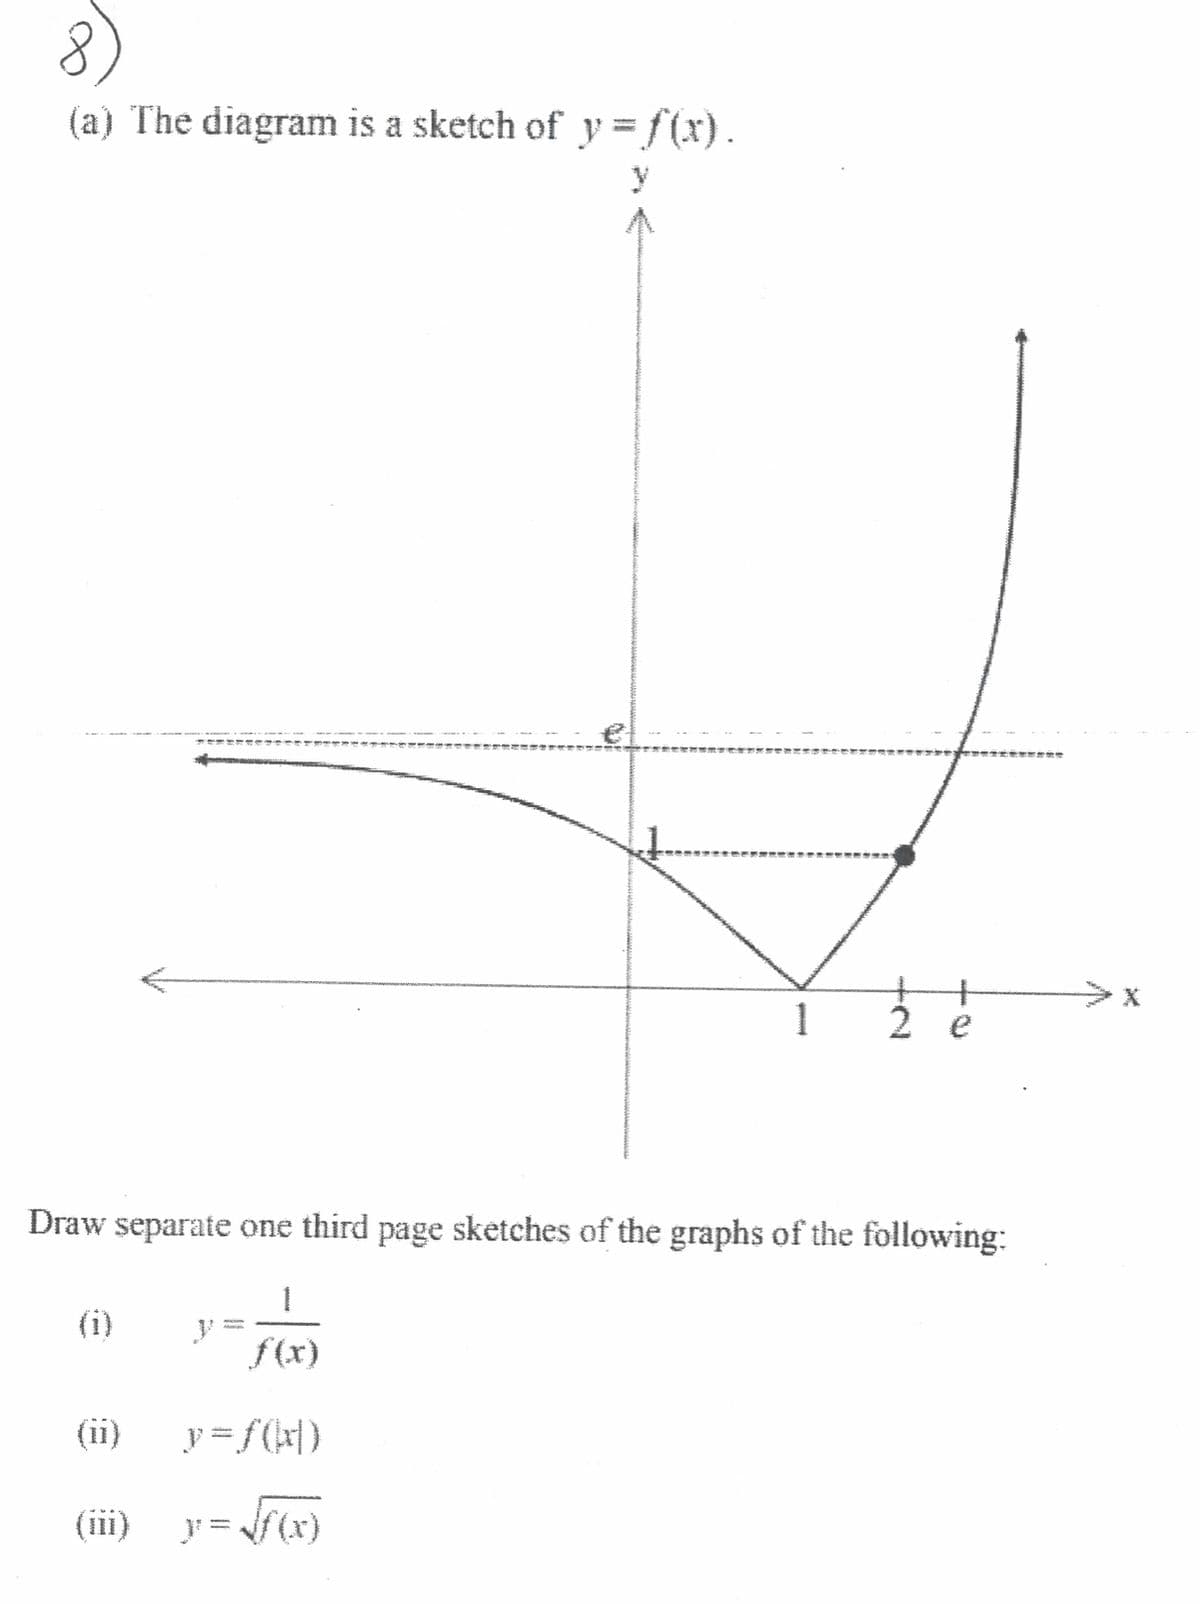 8)
(a) The diagram is a sketch of y = f(x).
y
1
+
2 e
Draw separate one third page sketches of the graphs of the following:
(i)
f(x)
(ii)
y = f(x\)
(iii)
}} = f(x)
